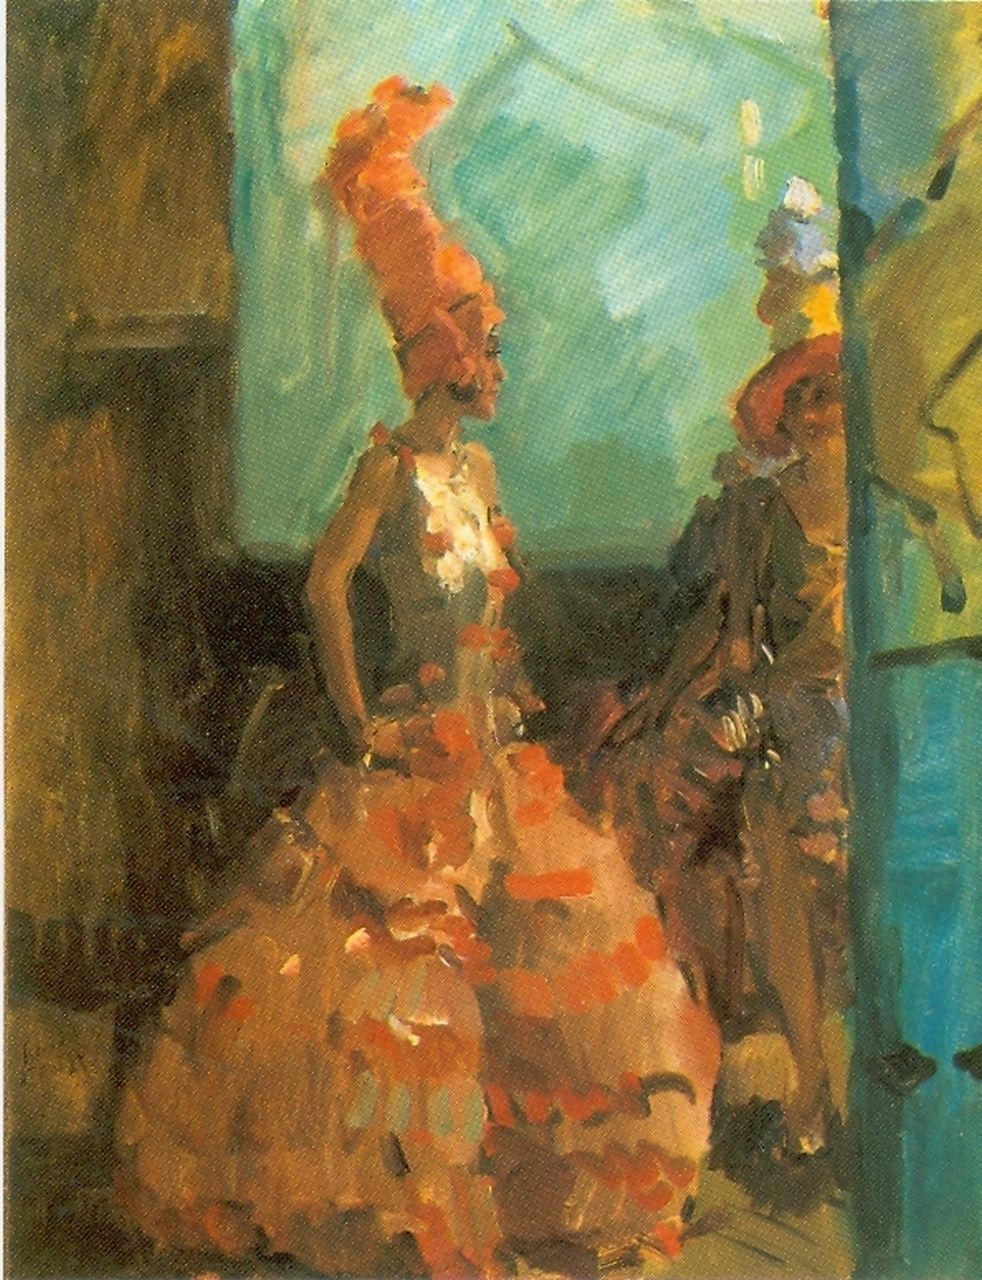 Israels I.L.  | 'Isaac' Lazarus Israels, 'Fien de la Mar' performing at the Scala-theatre, The Hague, oil on canvas 100.0 x 80.0 cm, signed l.l. and around 1928